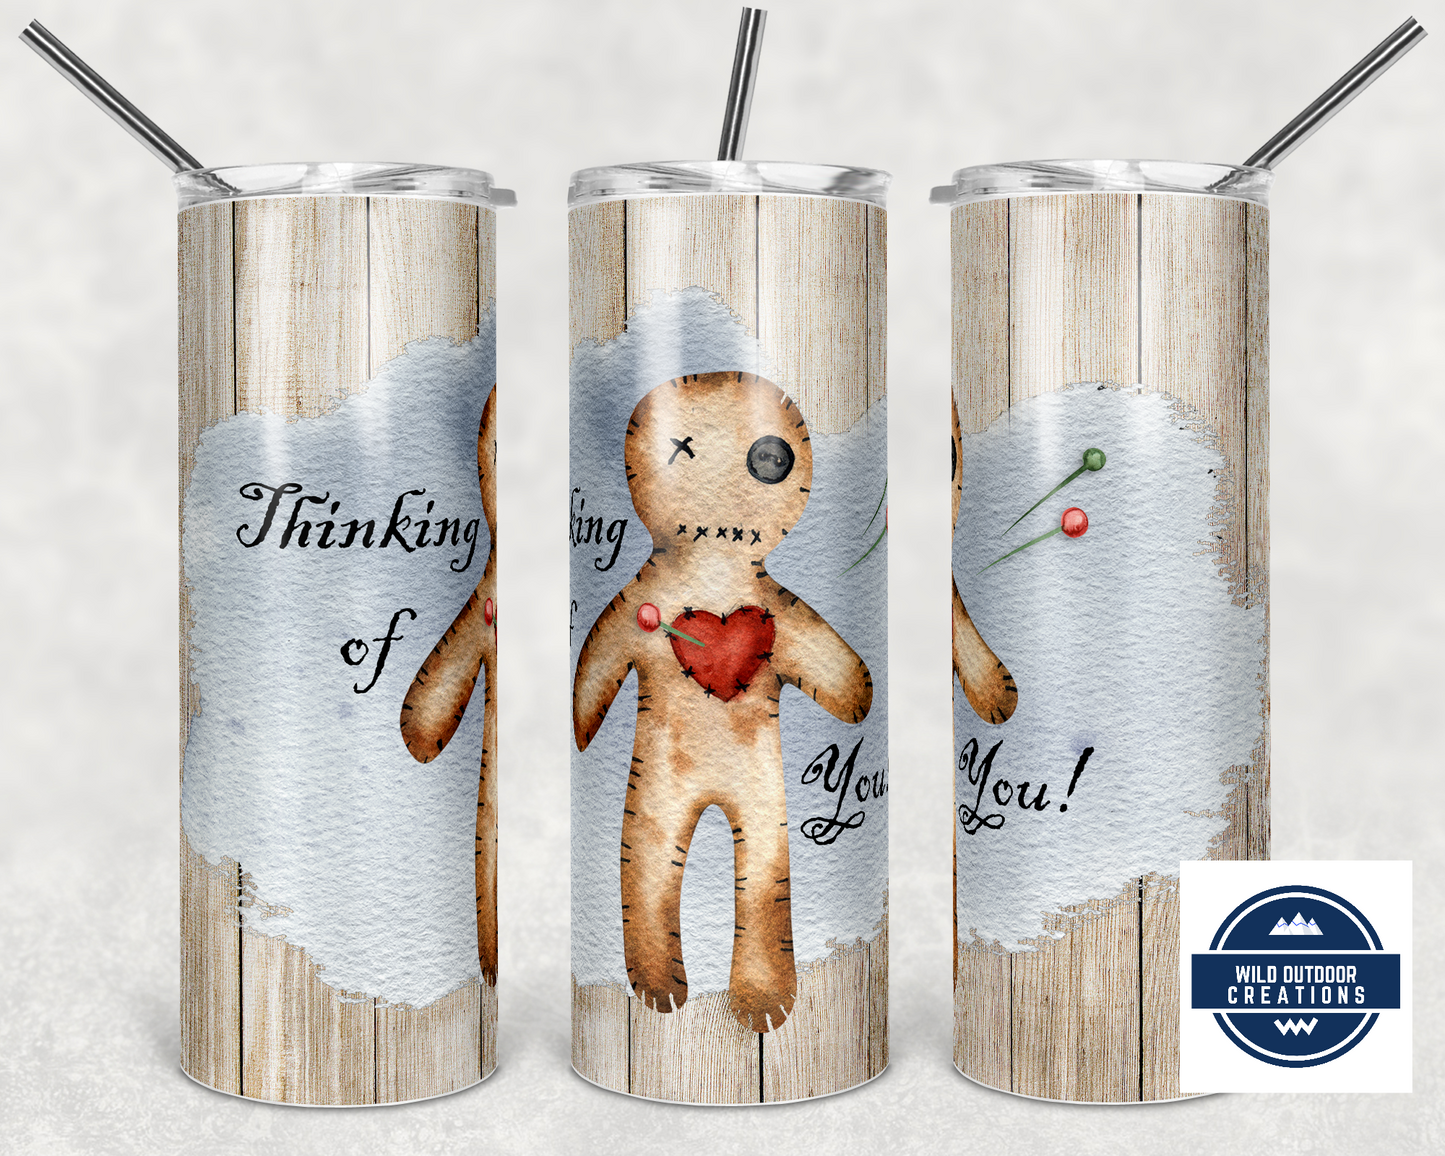 Anti Valentine 20 oz Skinny Tumbler, To go cup with lid and straw, Travel Coffee Mug, Iced Coffee Tumbler - Wild Outdoor Creations